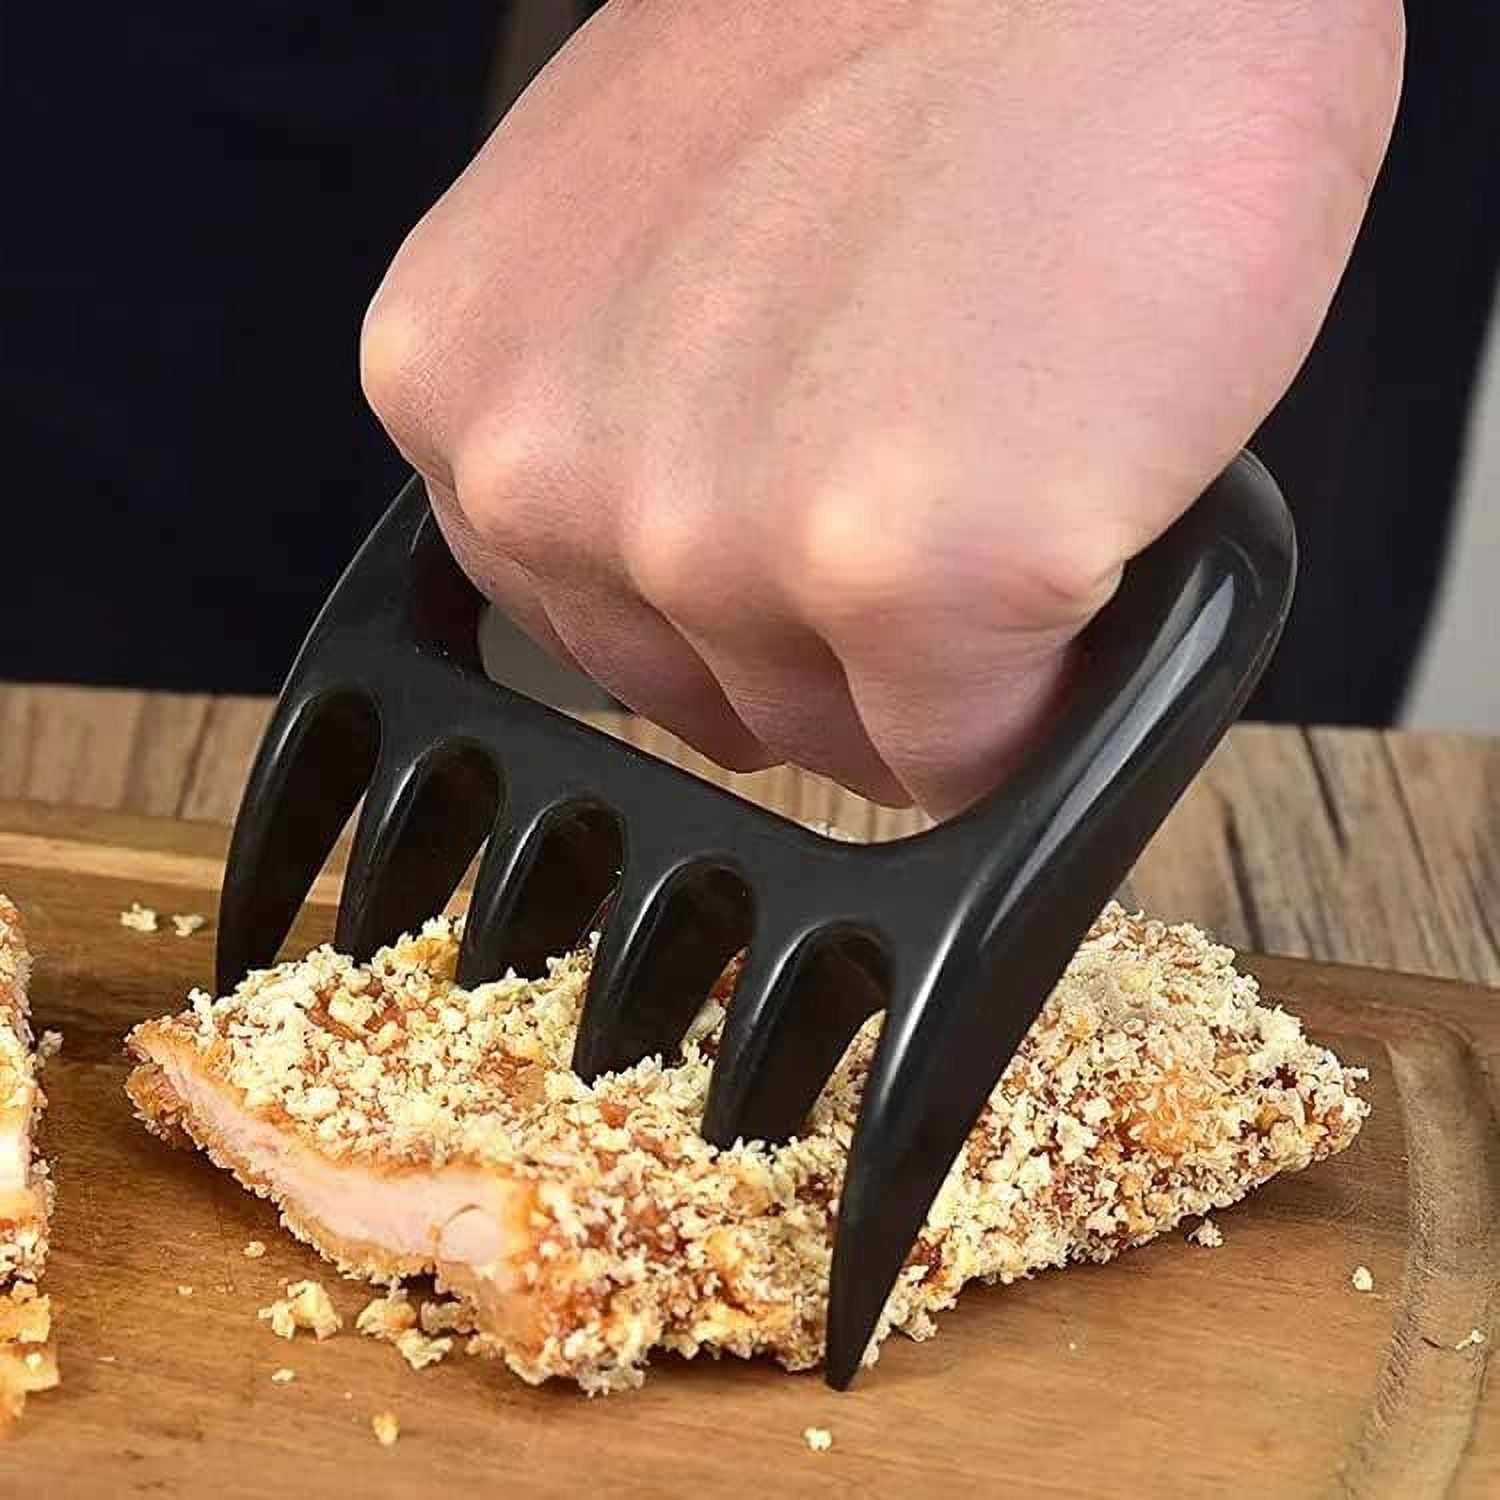 KitchenReady Meat Claws Perfect Shredder for Pulled